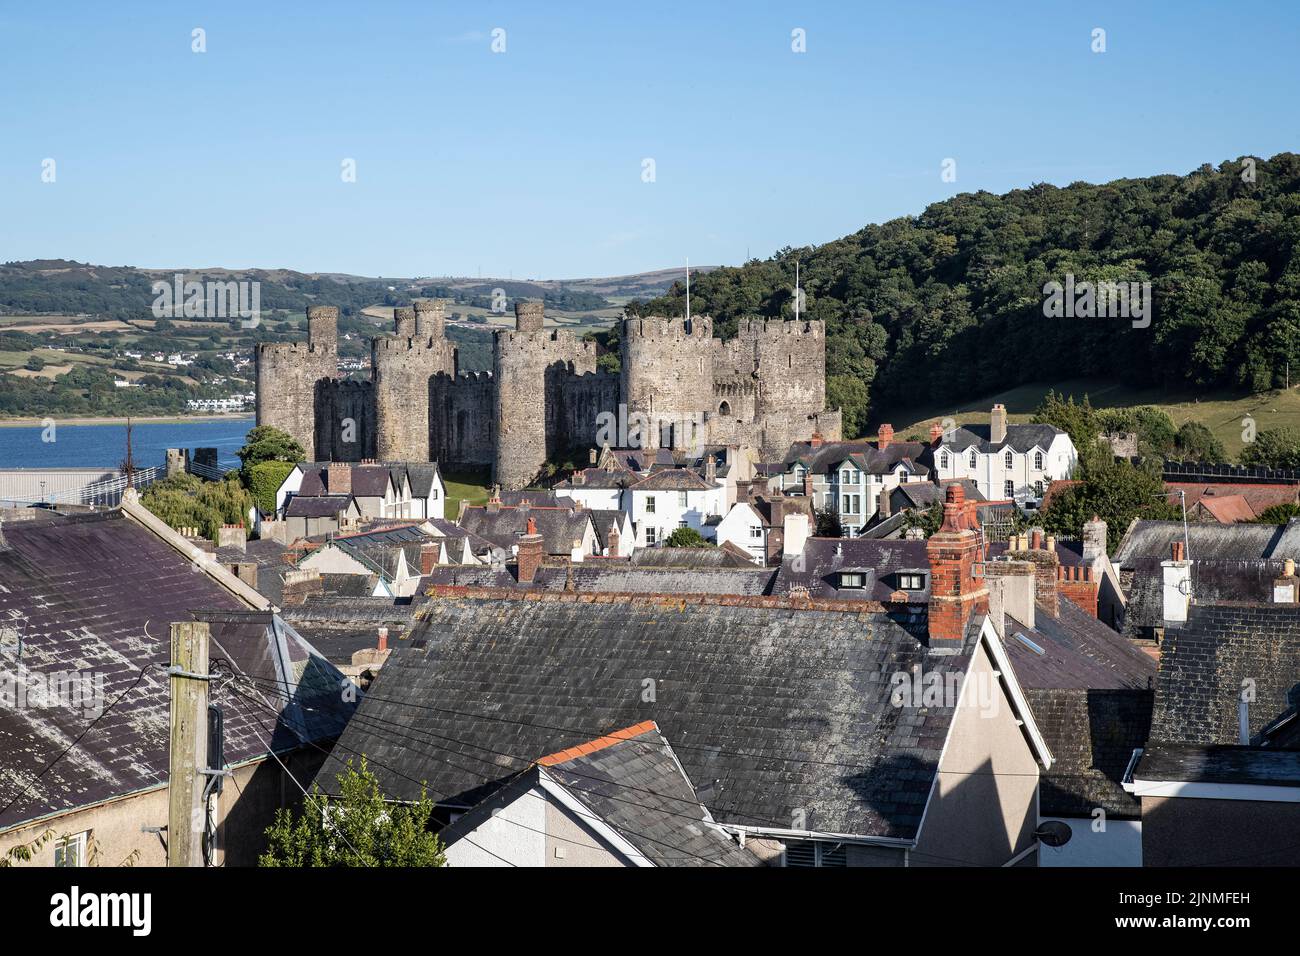 Conwy Castle and the walled town of Conwy (Aberconwy) Wales built in 1283 by Edward 1st and a Medieval fortress in an excellent state of preservation Stock Photo